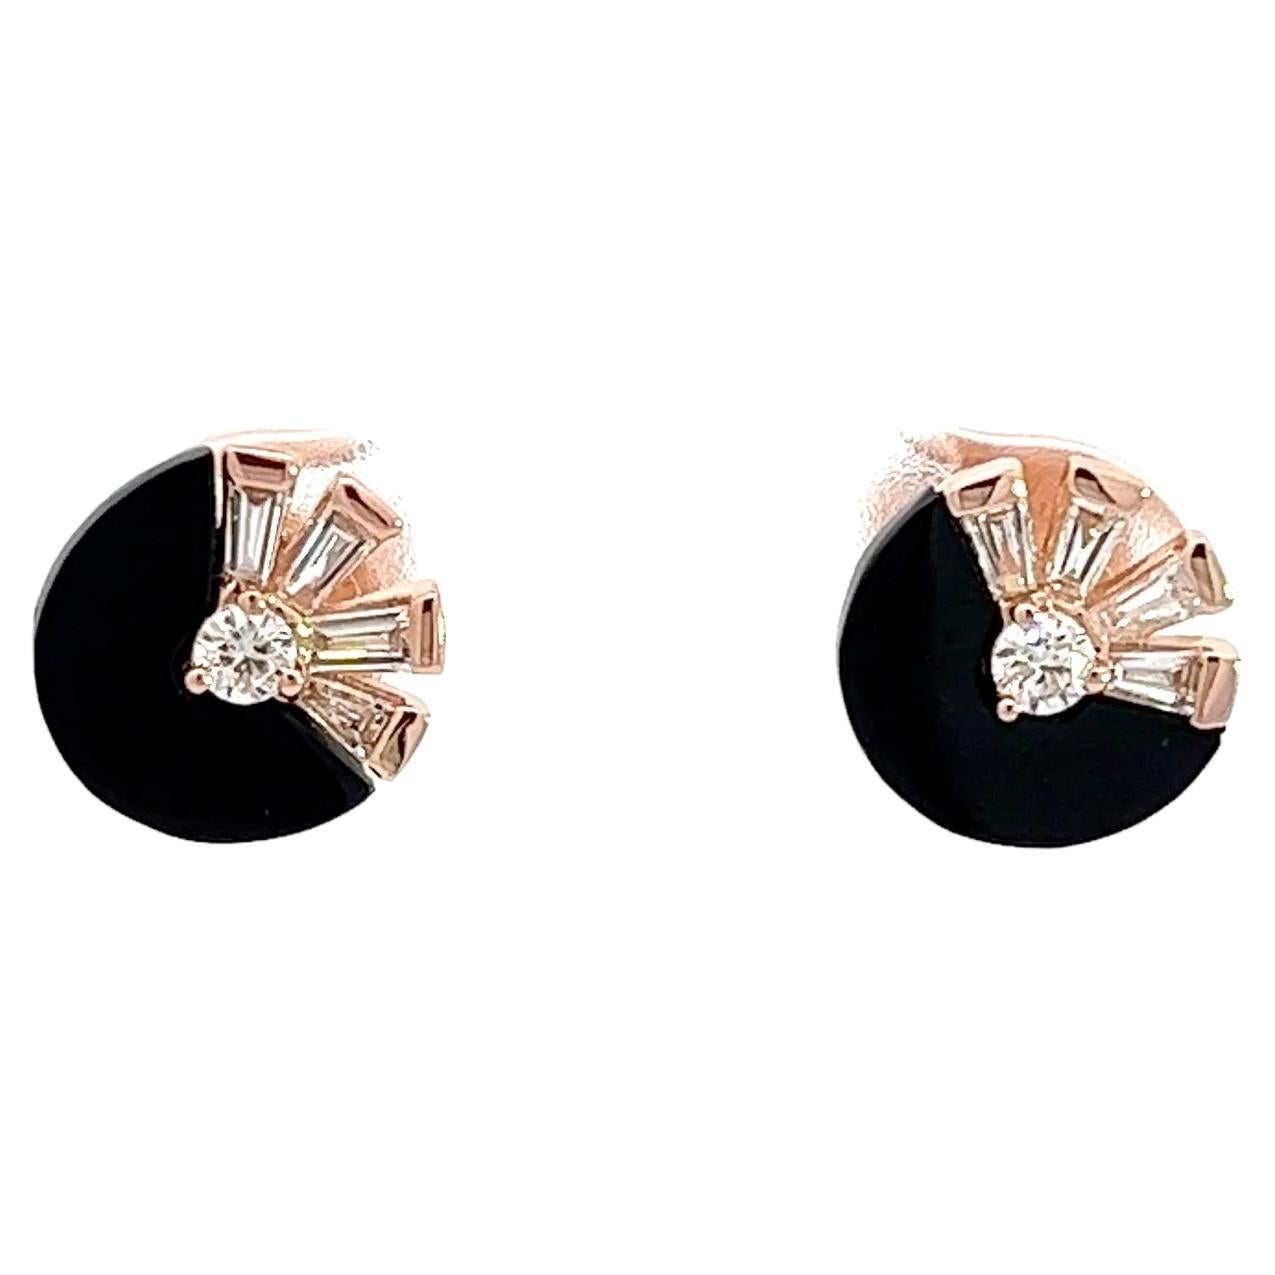 14K Rose Gold Earrings (Matching Necklace and Ring Available)

Diamonds 1